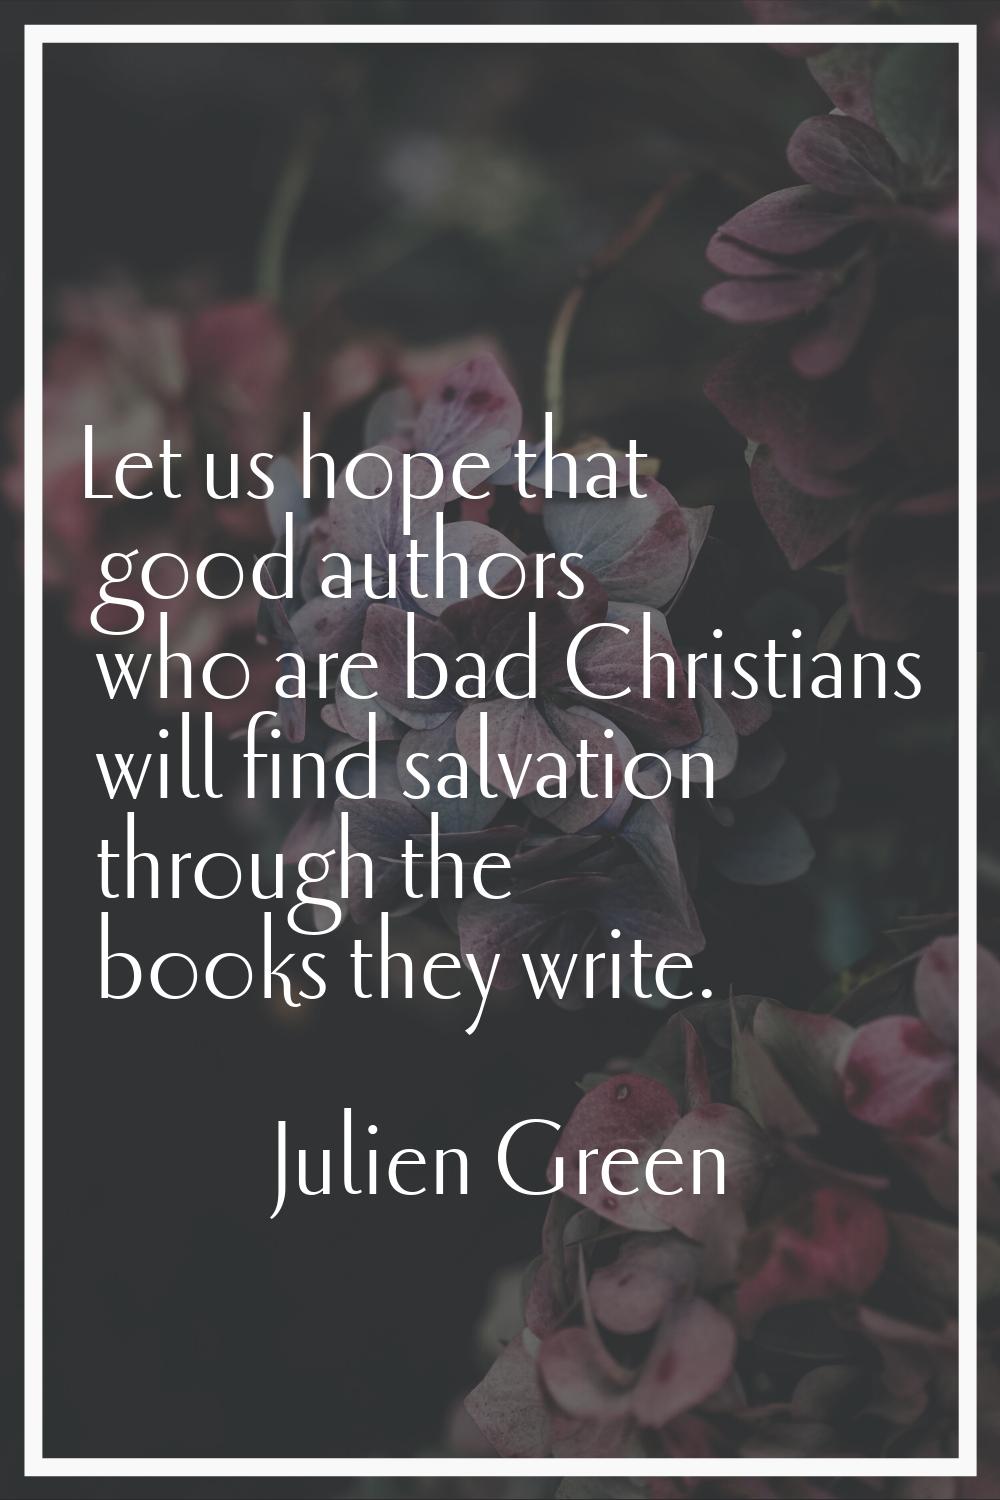 Let us hope that good authors who are bad Christians will find salvation through the books they wri